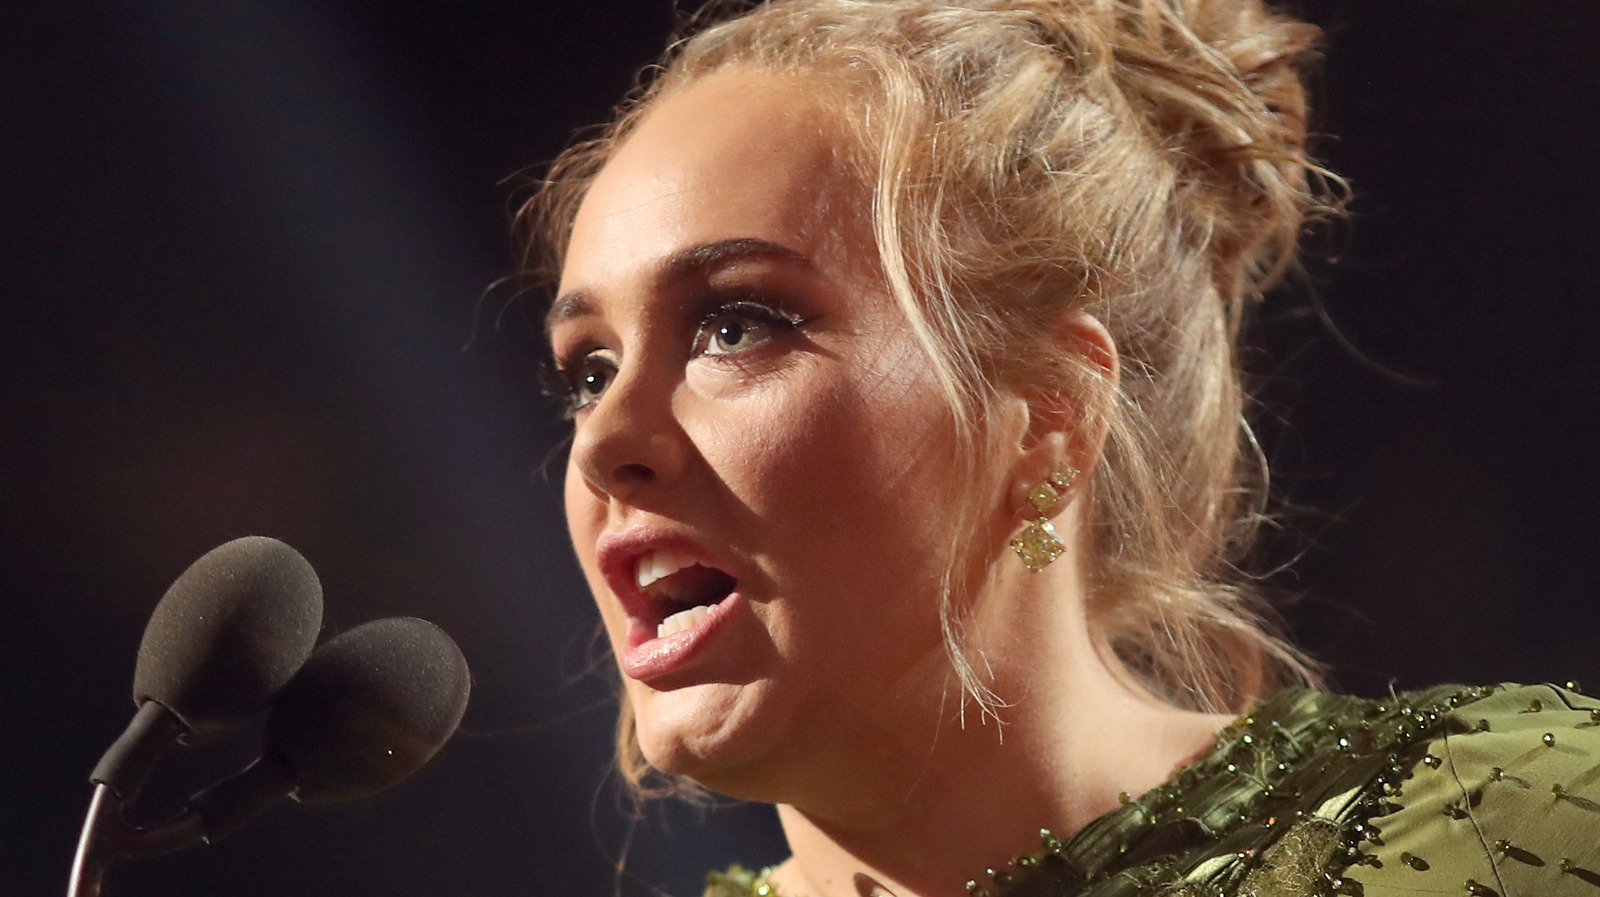 Adele’s Tour Cancelation Might Be More Complicated Than You Think